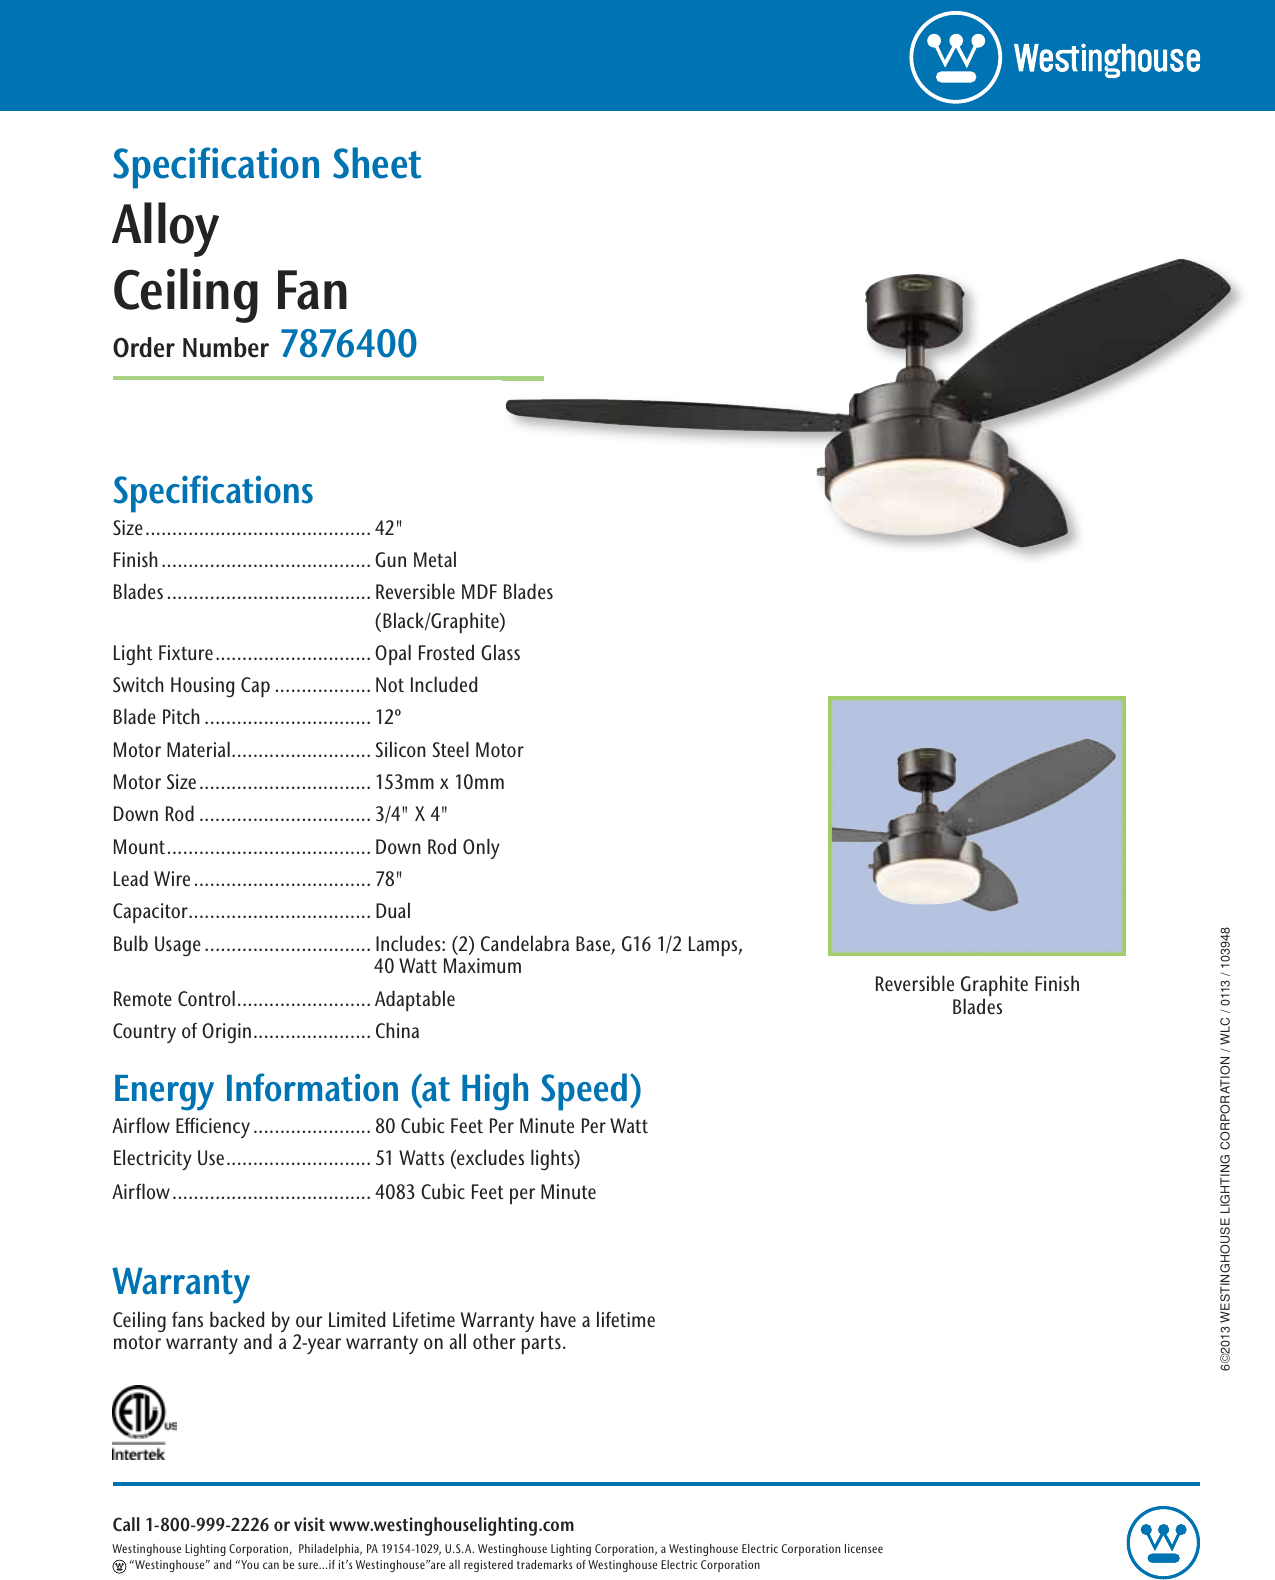 Alloy 42-Inch Reversible Three-Blade Indoor Ceiling Fan Westinghouse 7876400 